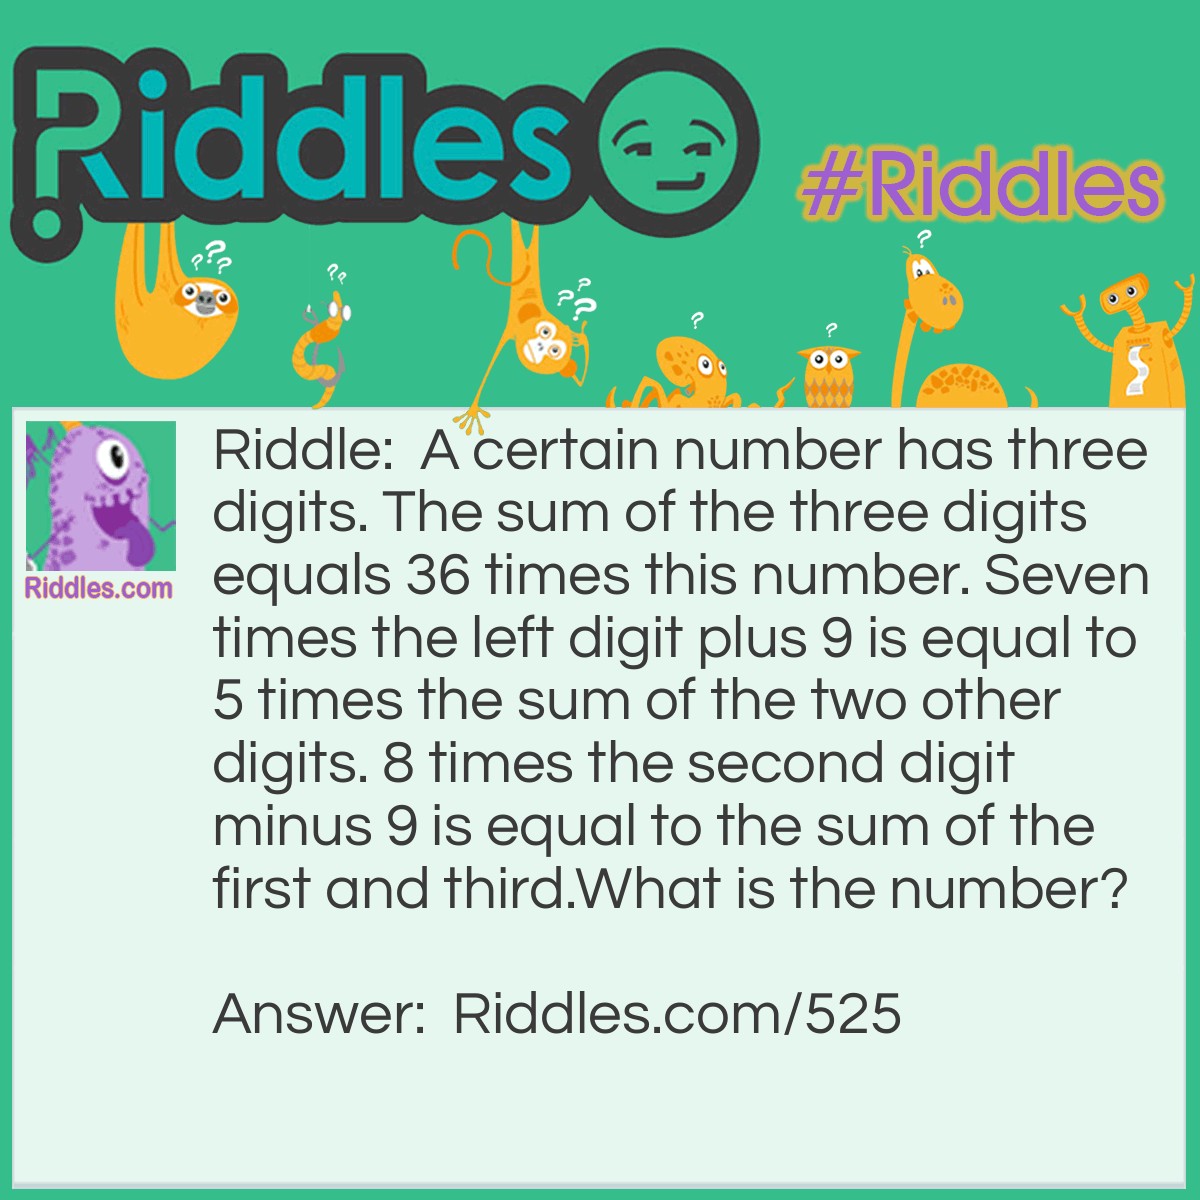 Riddle: A certain number has three digits. The sum of the three digits equals 36 times this number. Seven times the left digit plus 9 is equal to 5 times the sum of the two other digits. 8 times the second digit minus 9 is equal to the sum of the first and third.
What is the number? Answer: This one is fairly easy - 324 is the answer.